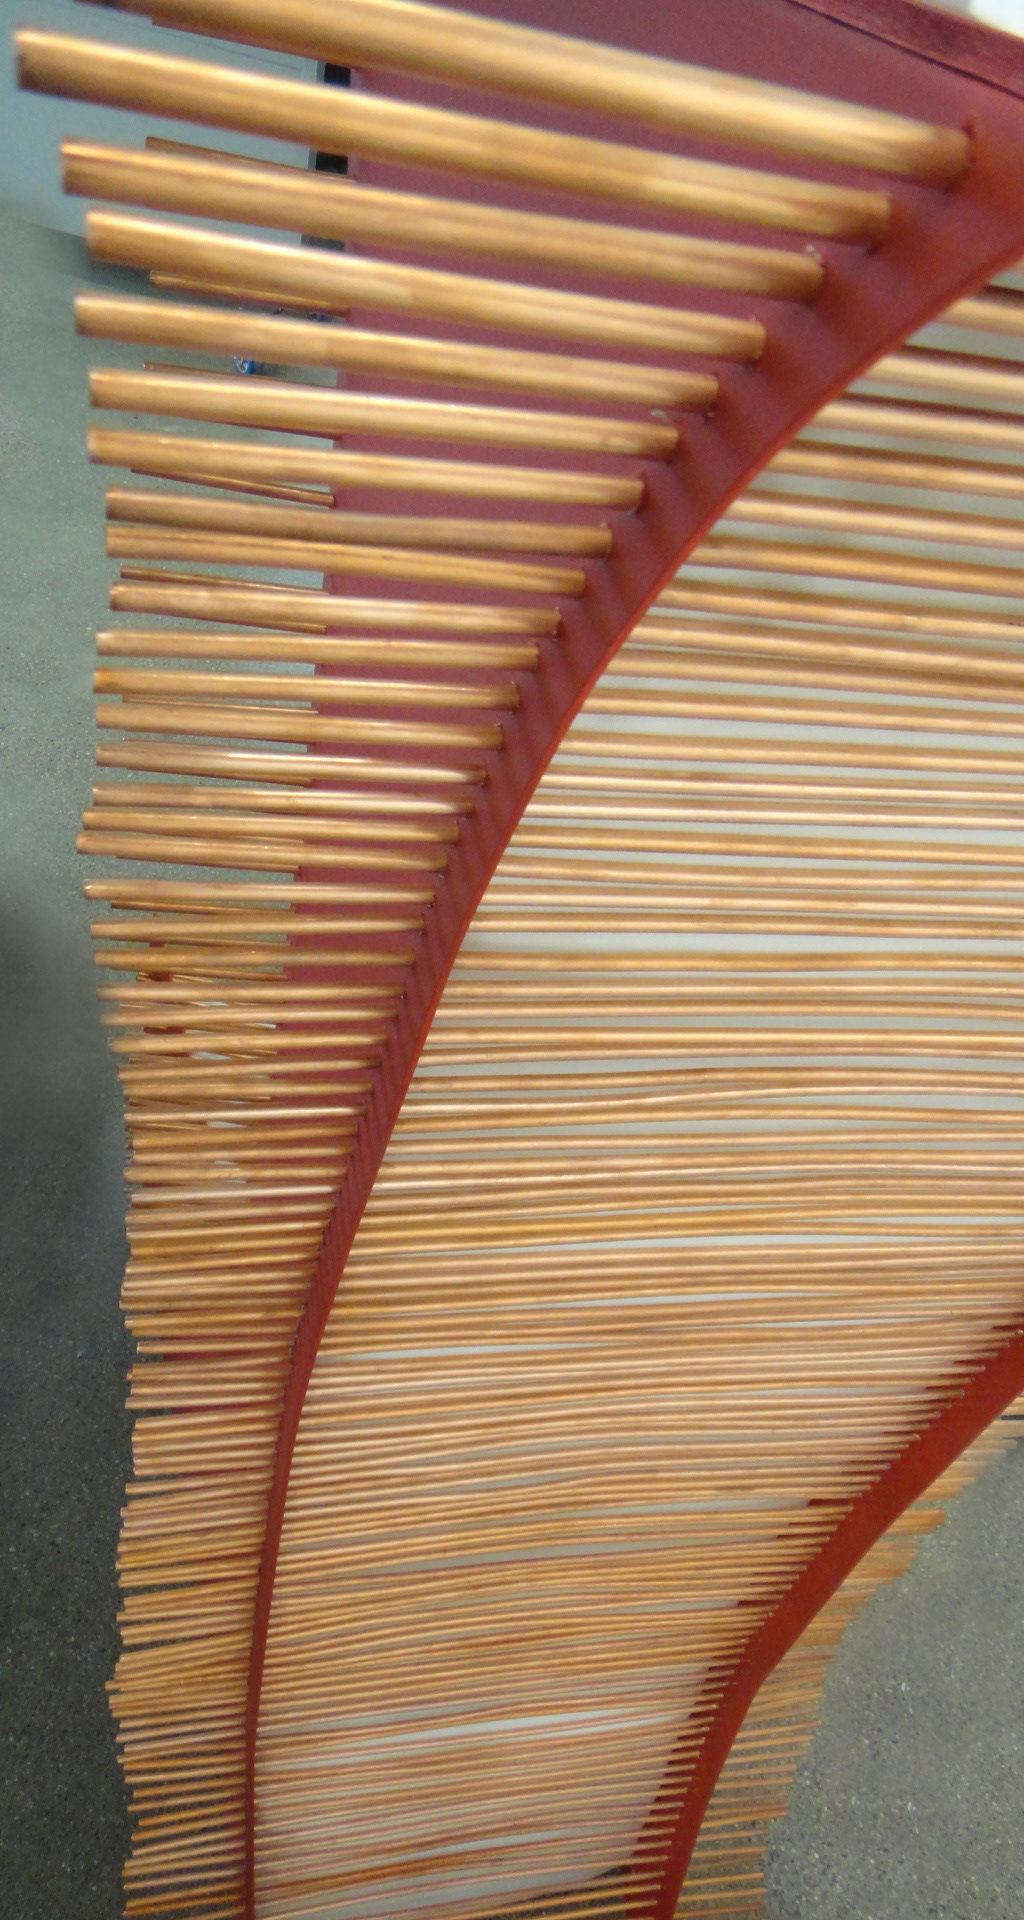 copper chair red design rods panels shape seat fabric